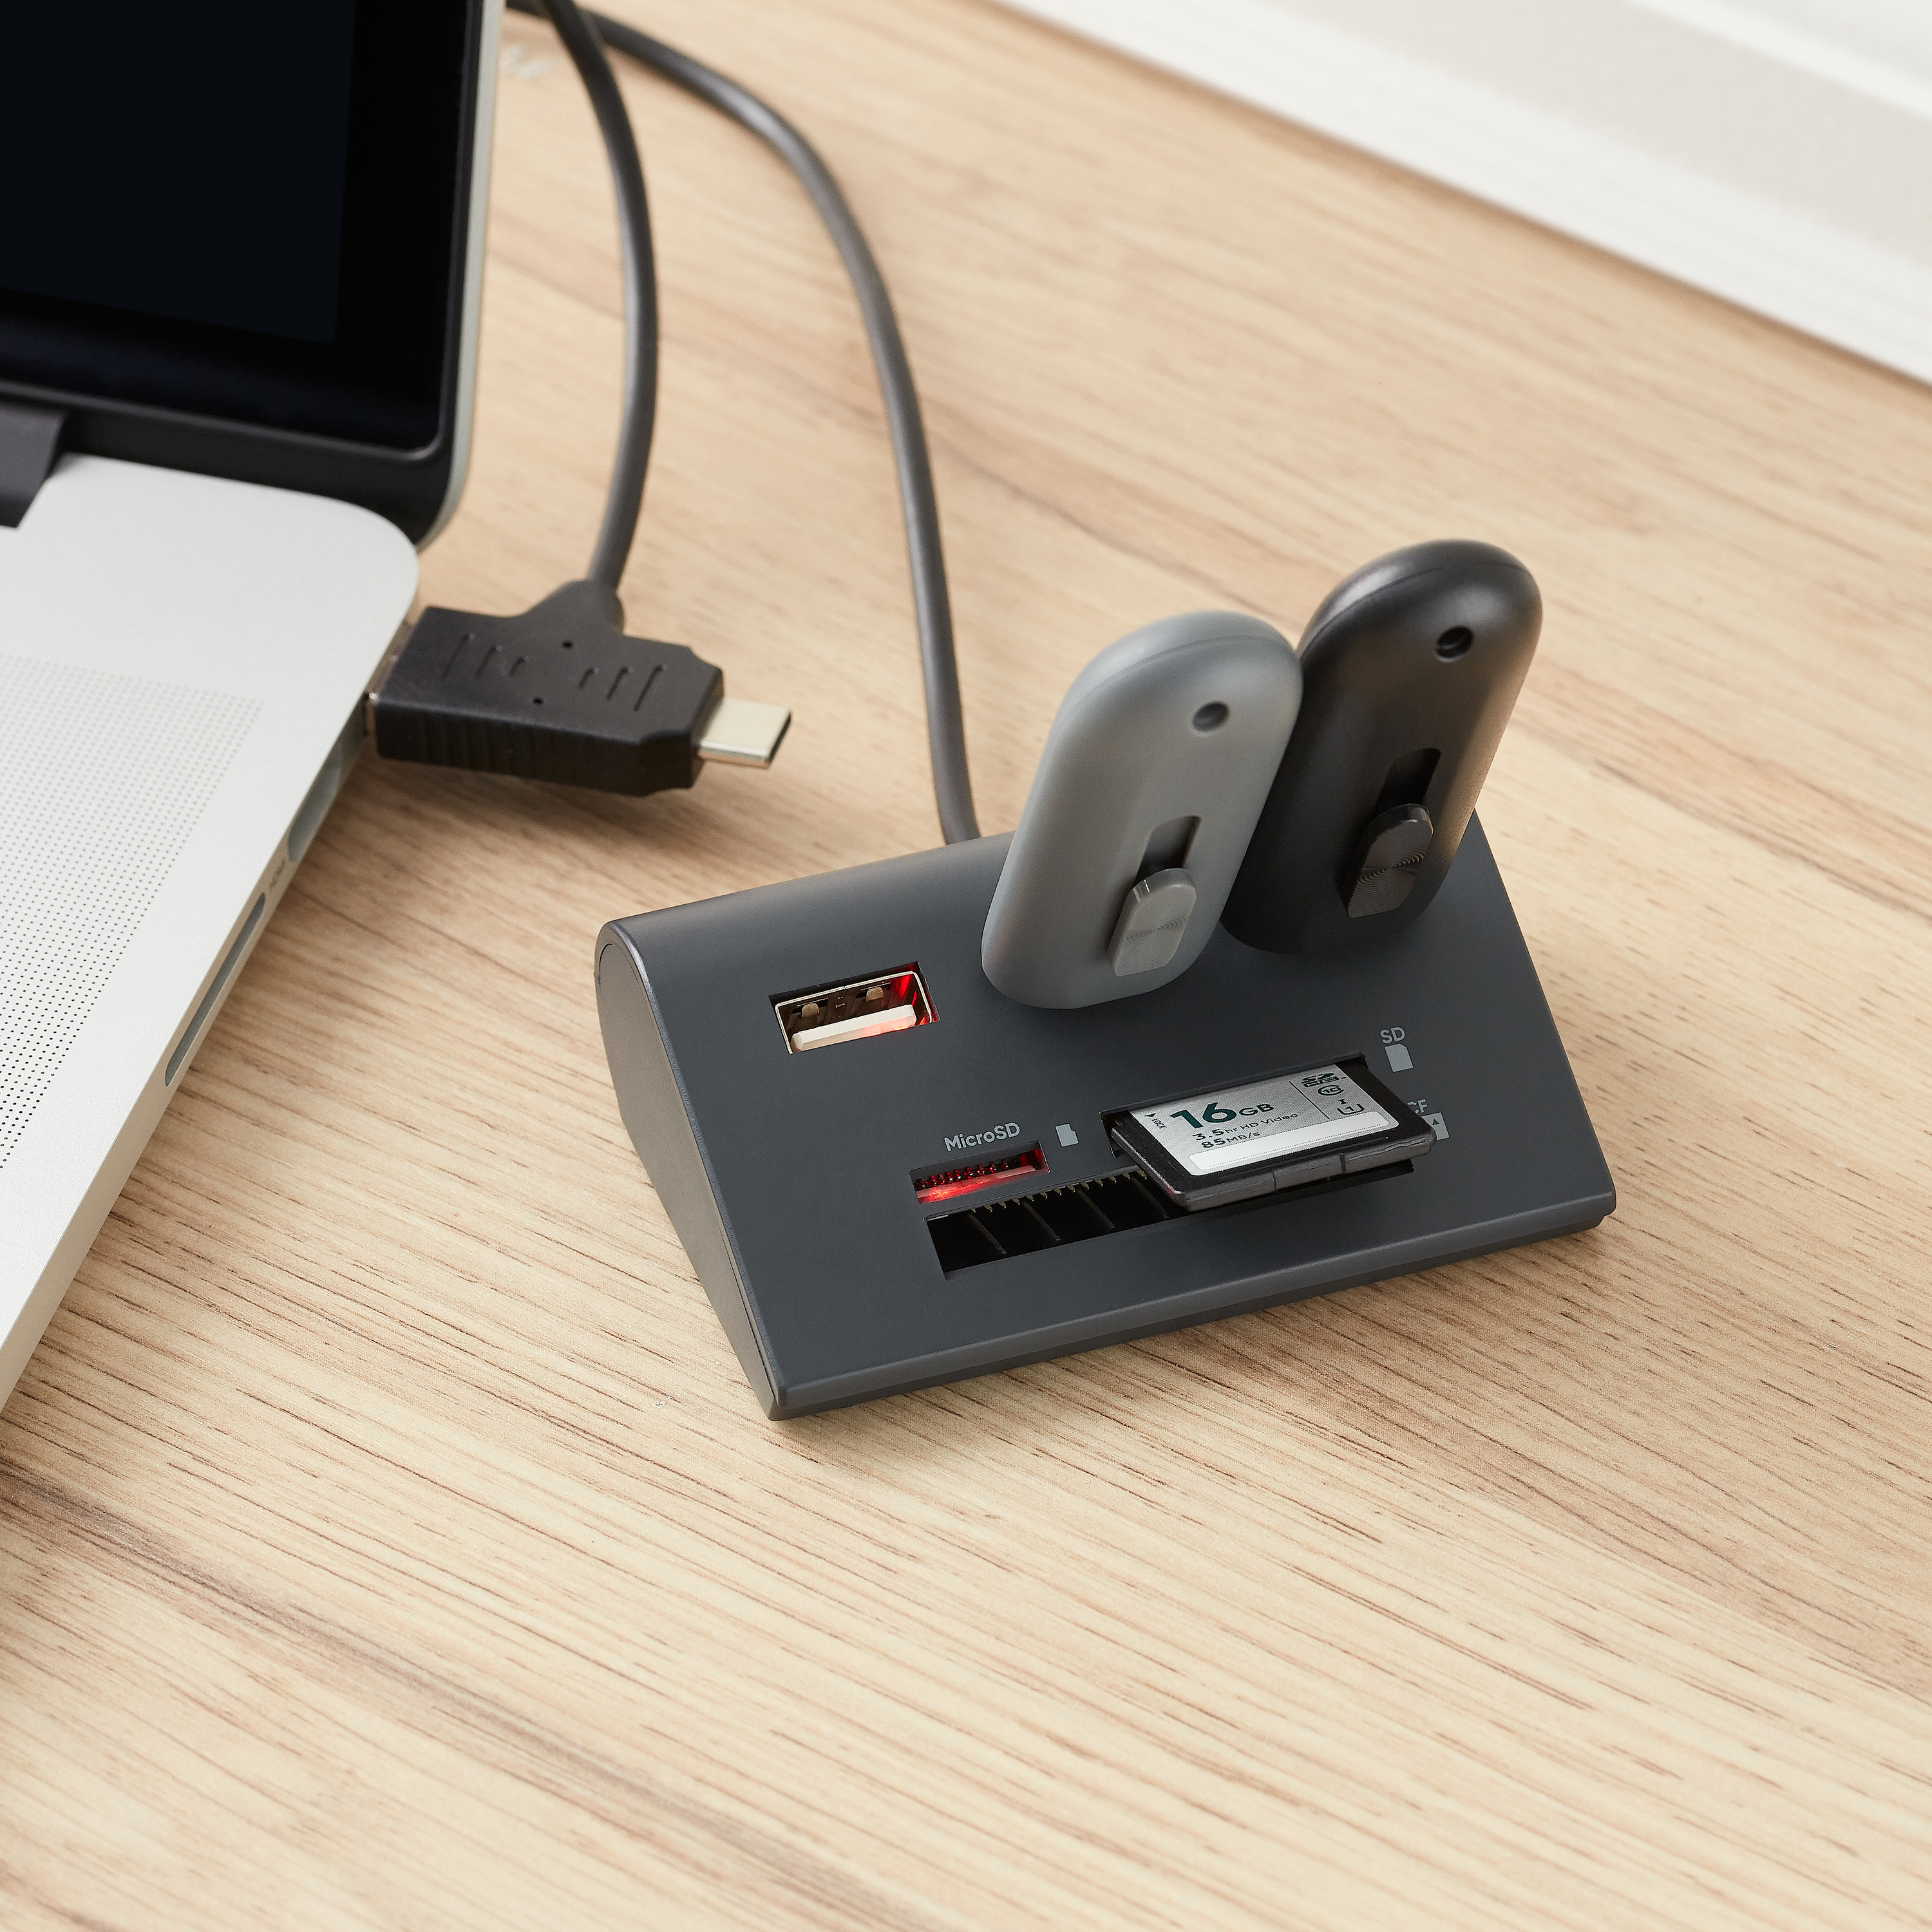 onn. Multi-Port USB Hub with SD, Micro SD and Compact Flash Card Reader - image 2 of 5